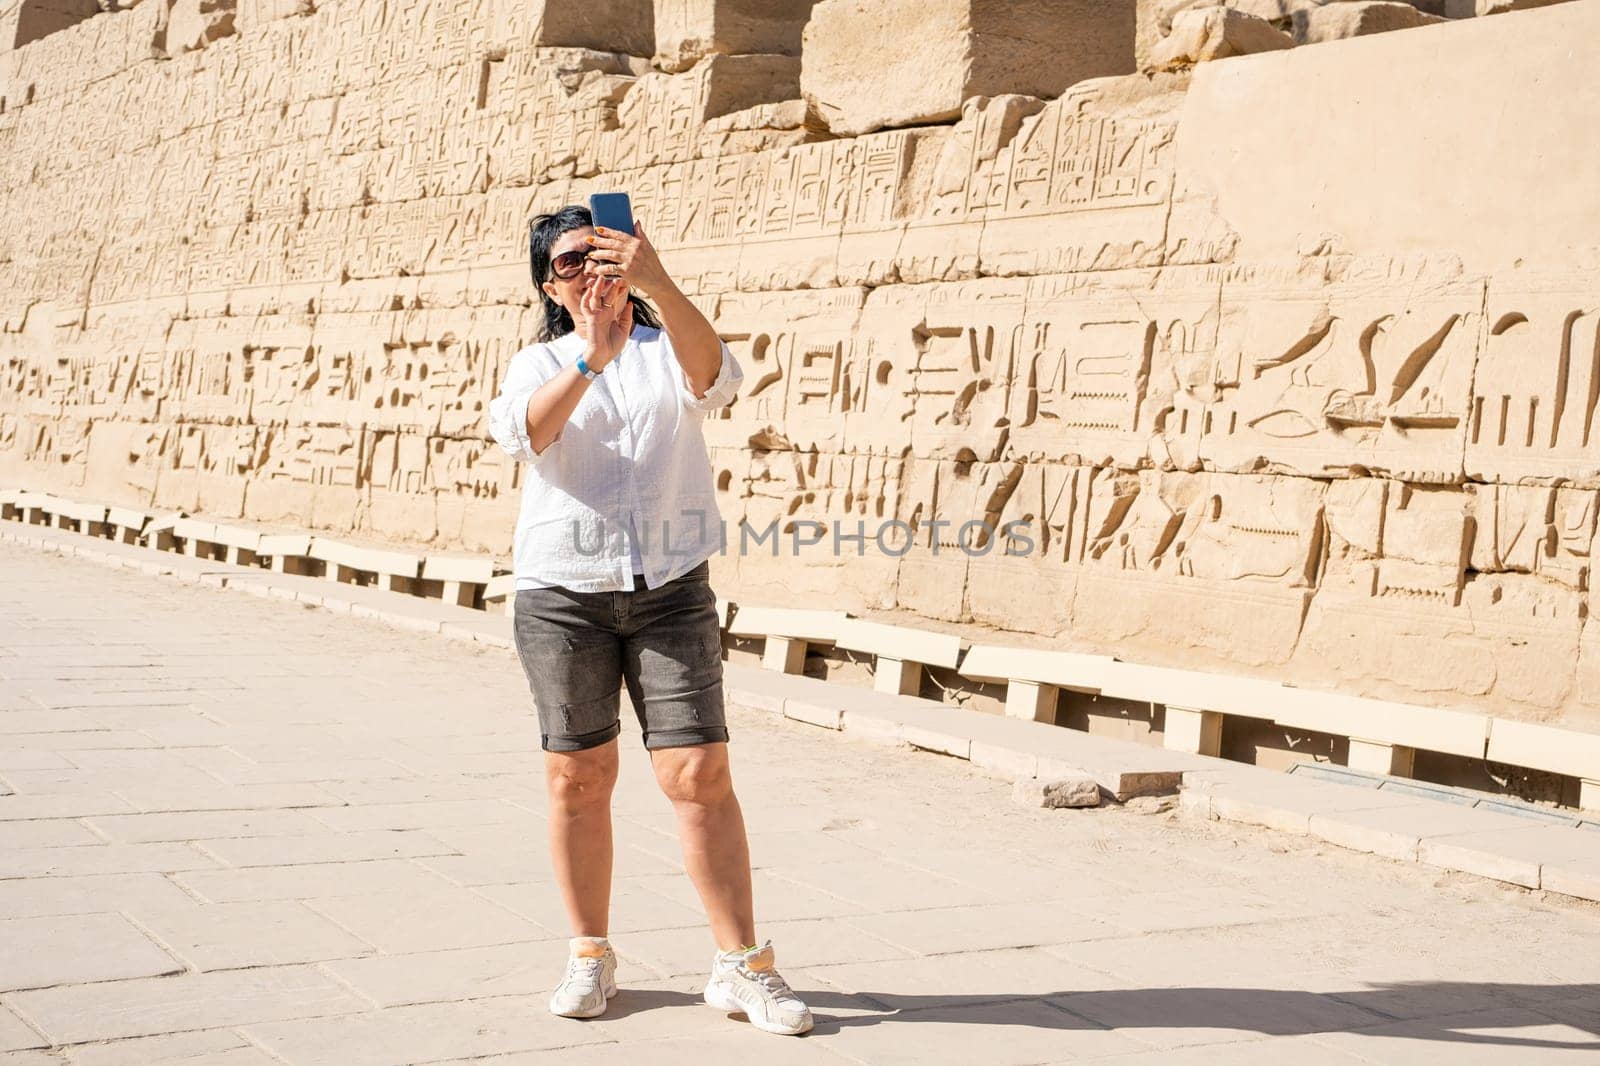 mature adult woman traveler explores the ruins of the ancient Karnak temple in the city of Luxor in Egypt, taking photo using smartphone. Great row of columns with carved hieroglyph